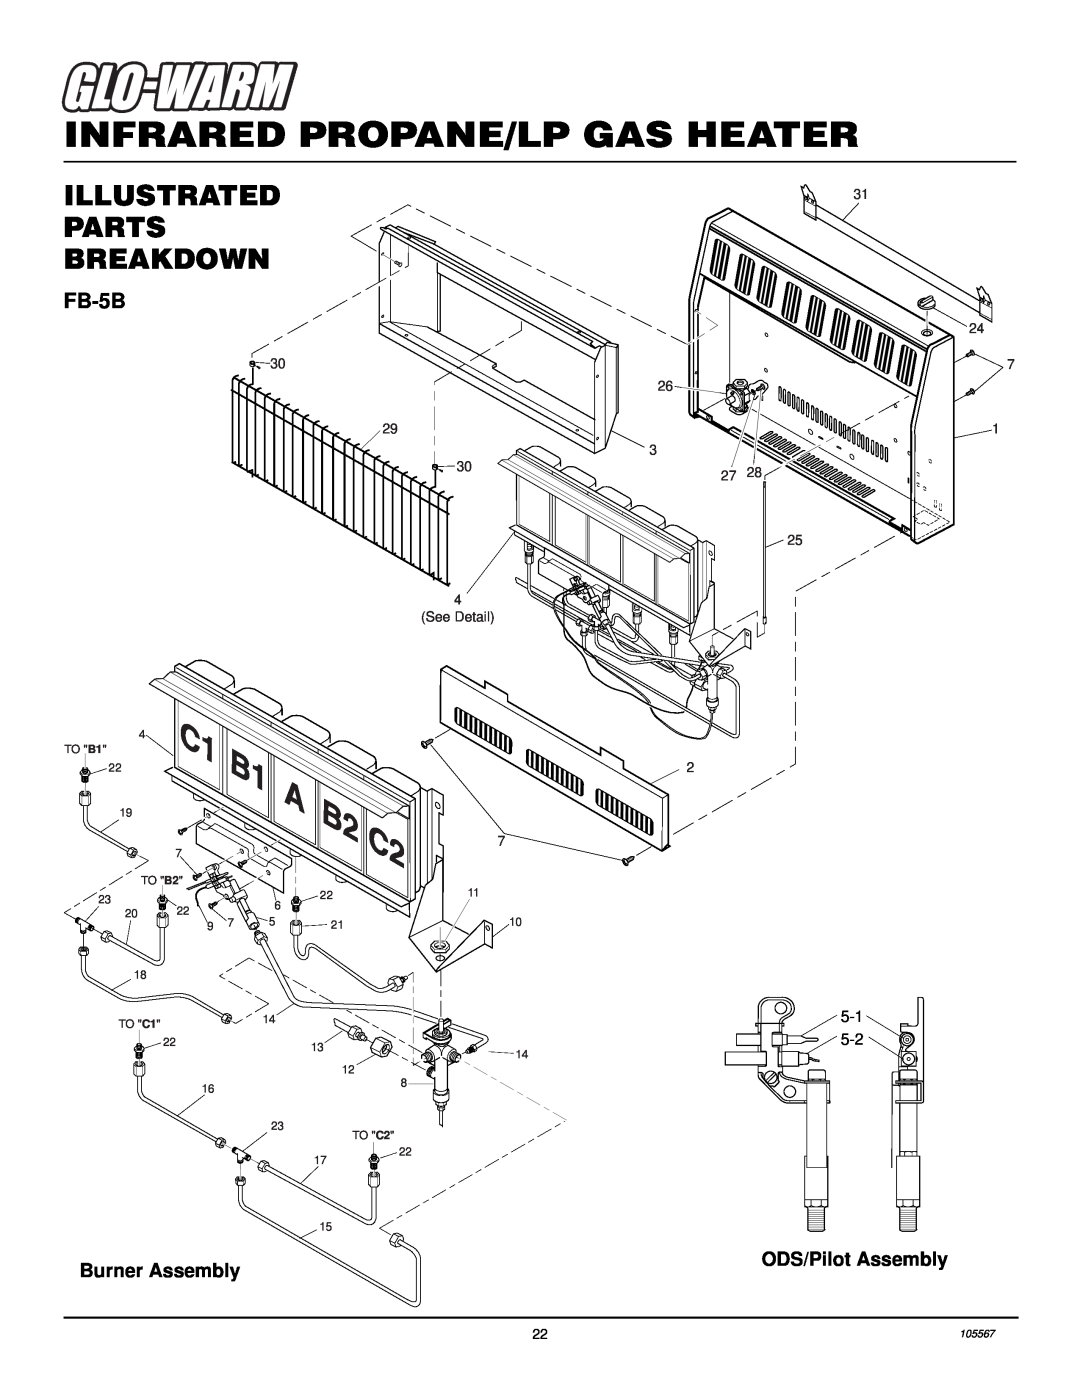 Desa FB-3B FB-5B, Infrared Propane/Lp Gas Heater, Illustrated Parts Breakdown, Burner Assembly, ODS/Pilot Assembly, TO B1 